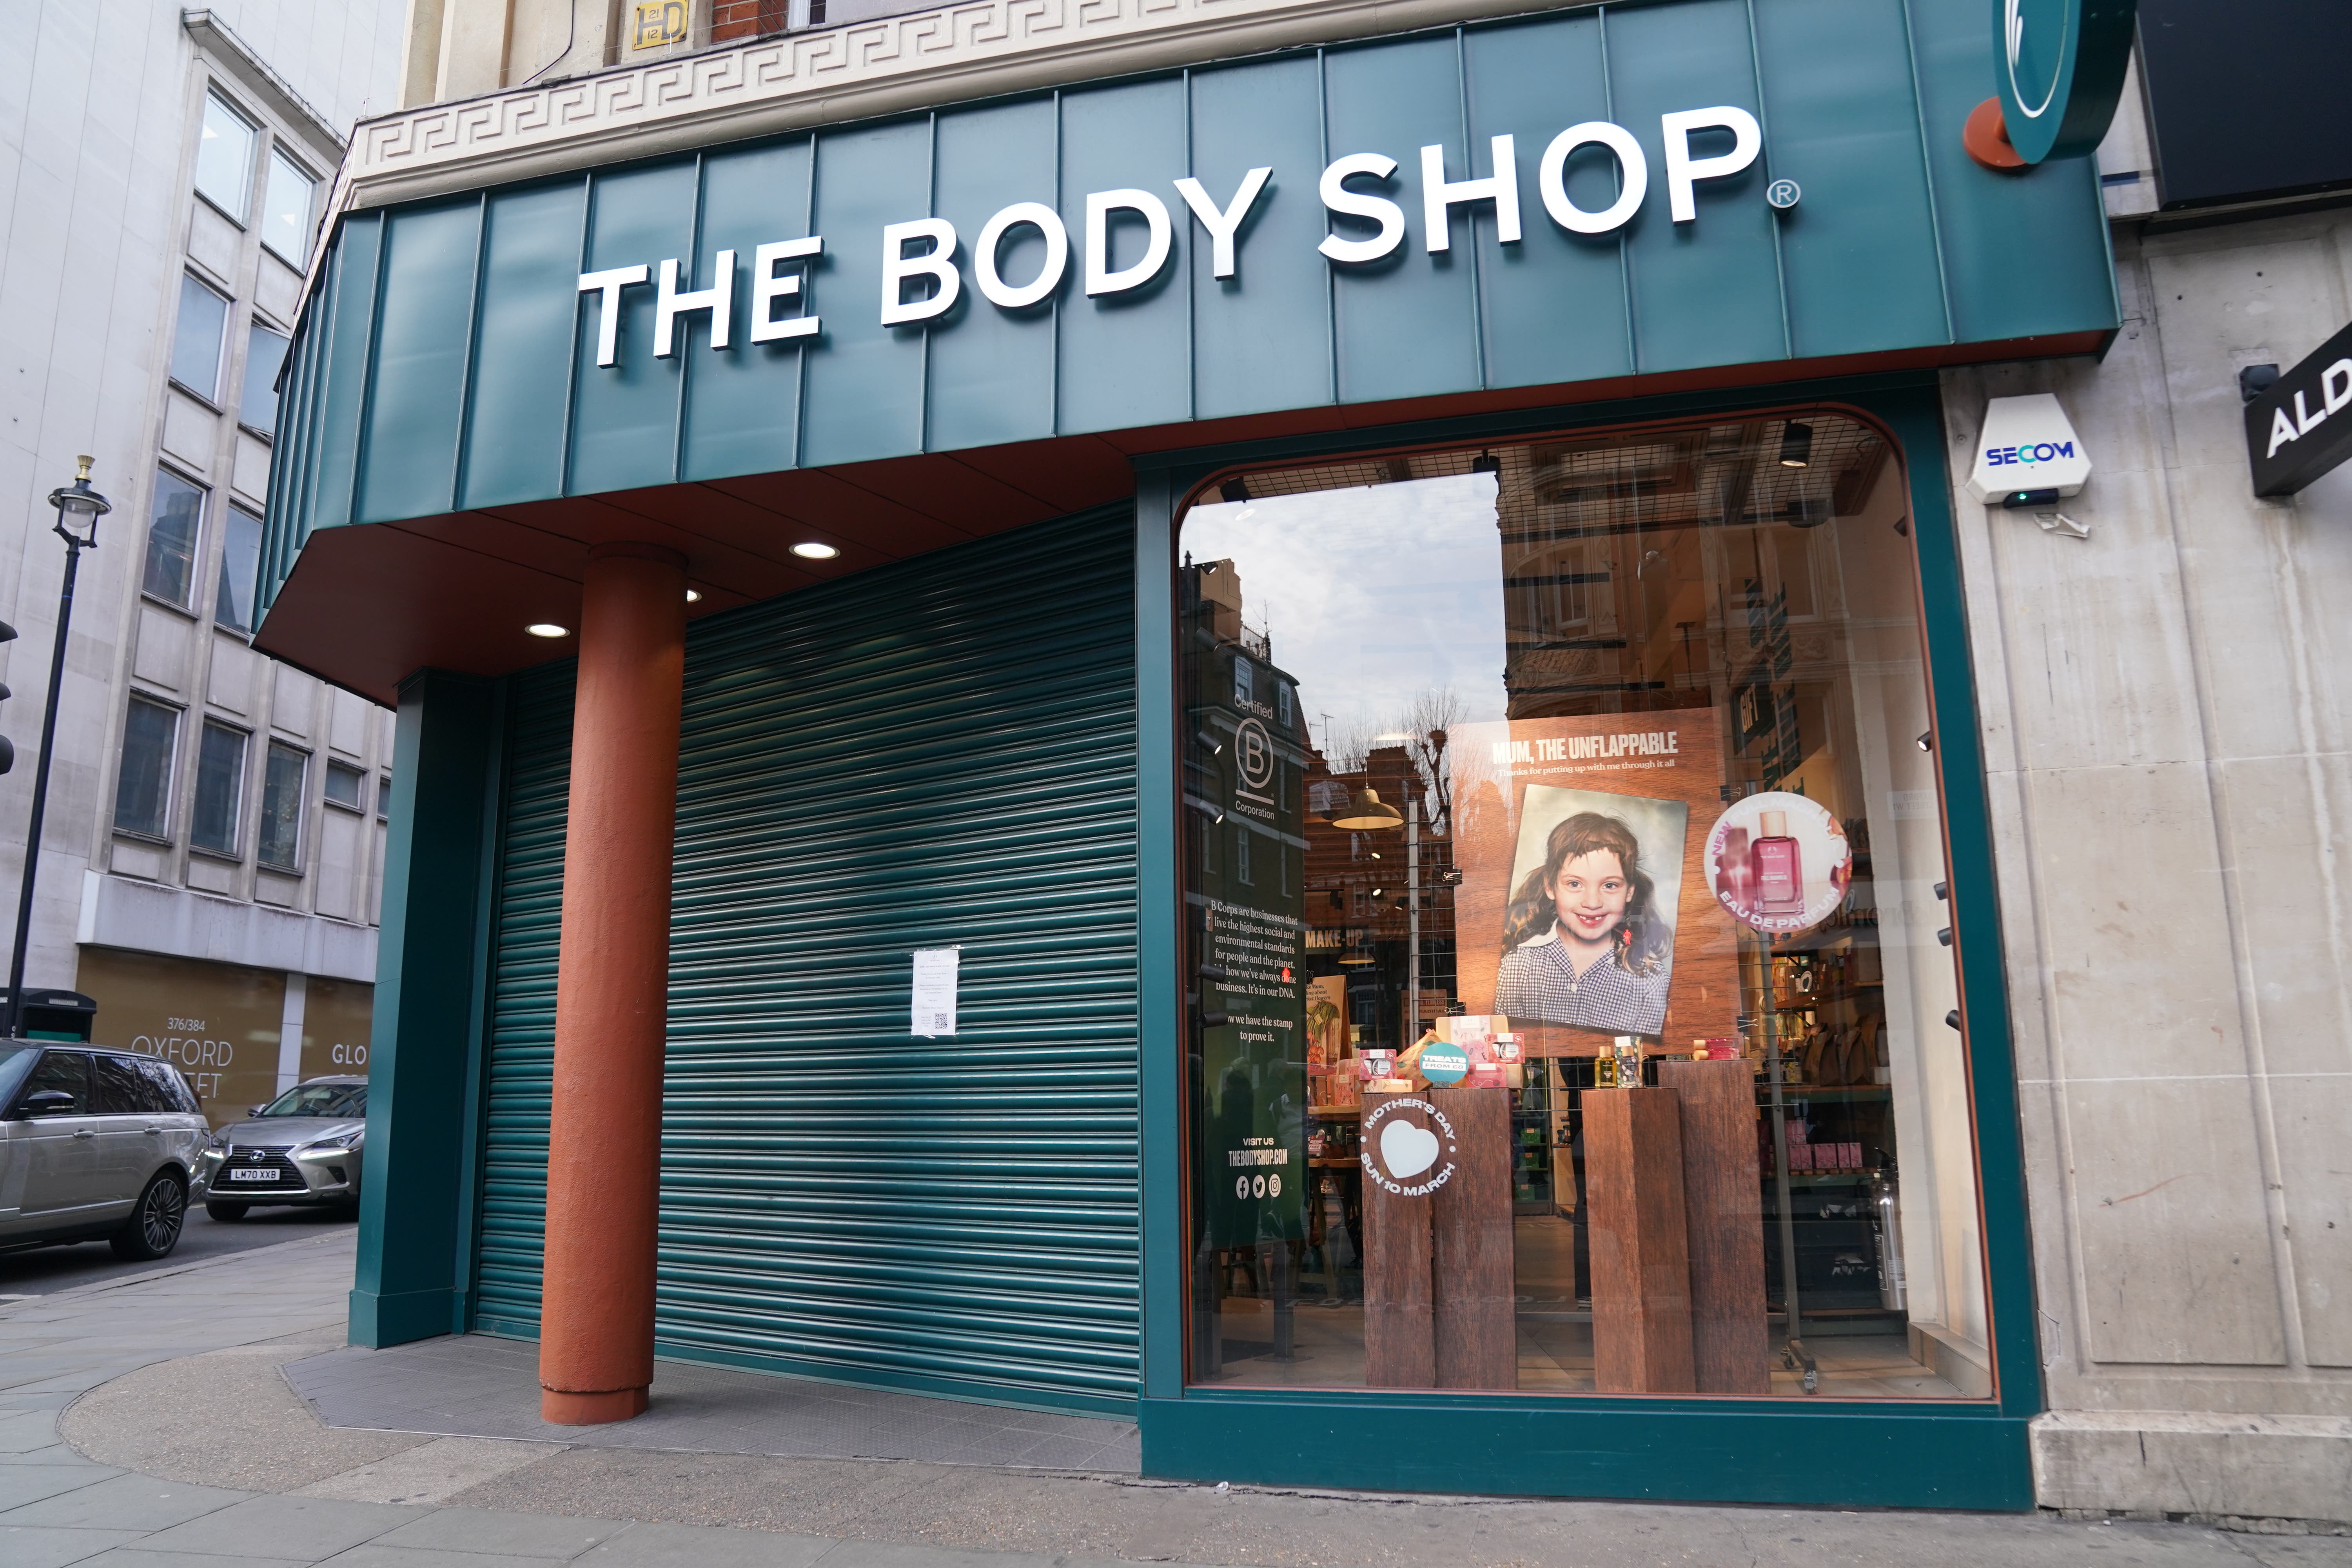 Administrators for the Body Shop have confirmed more store closures